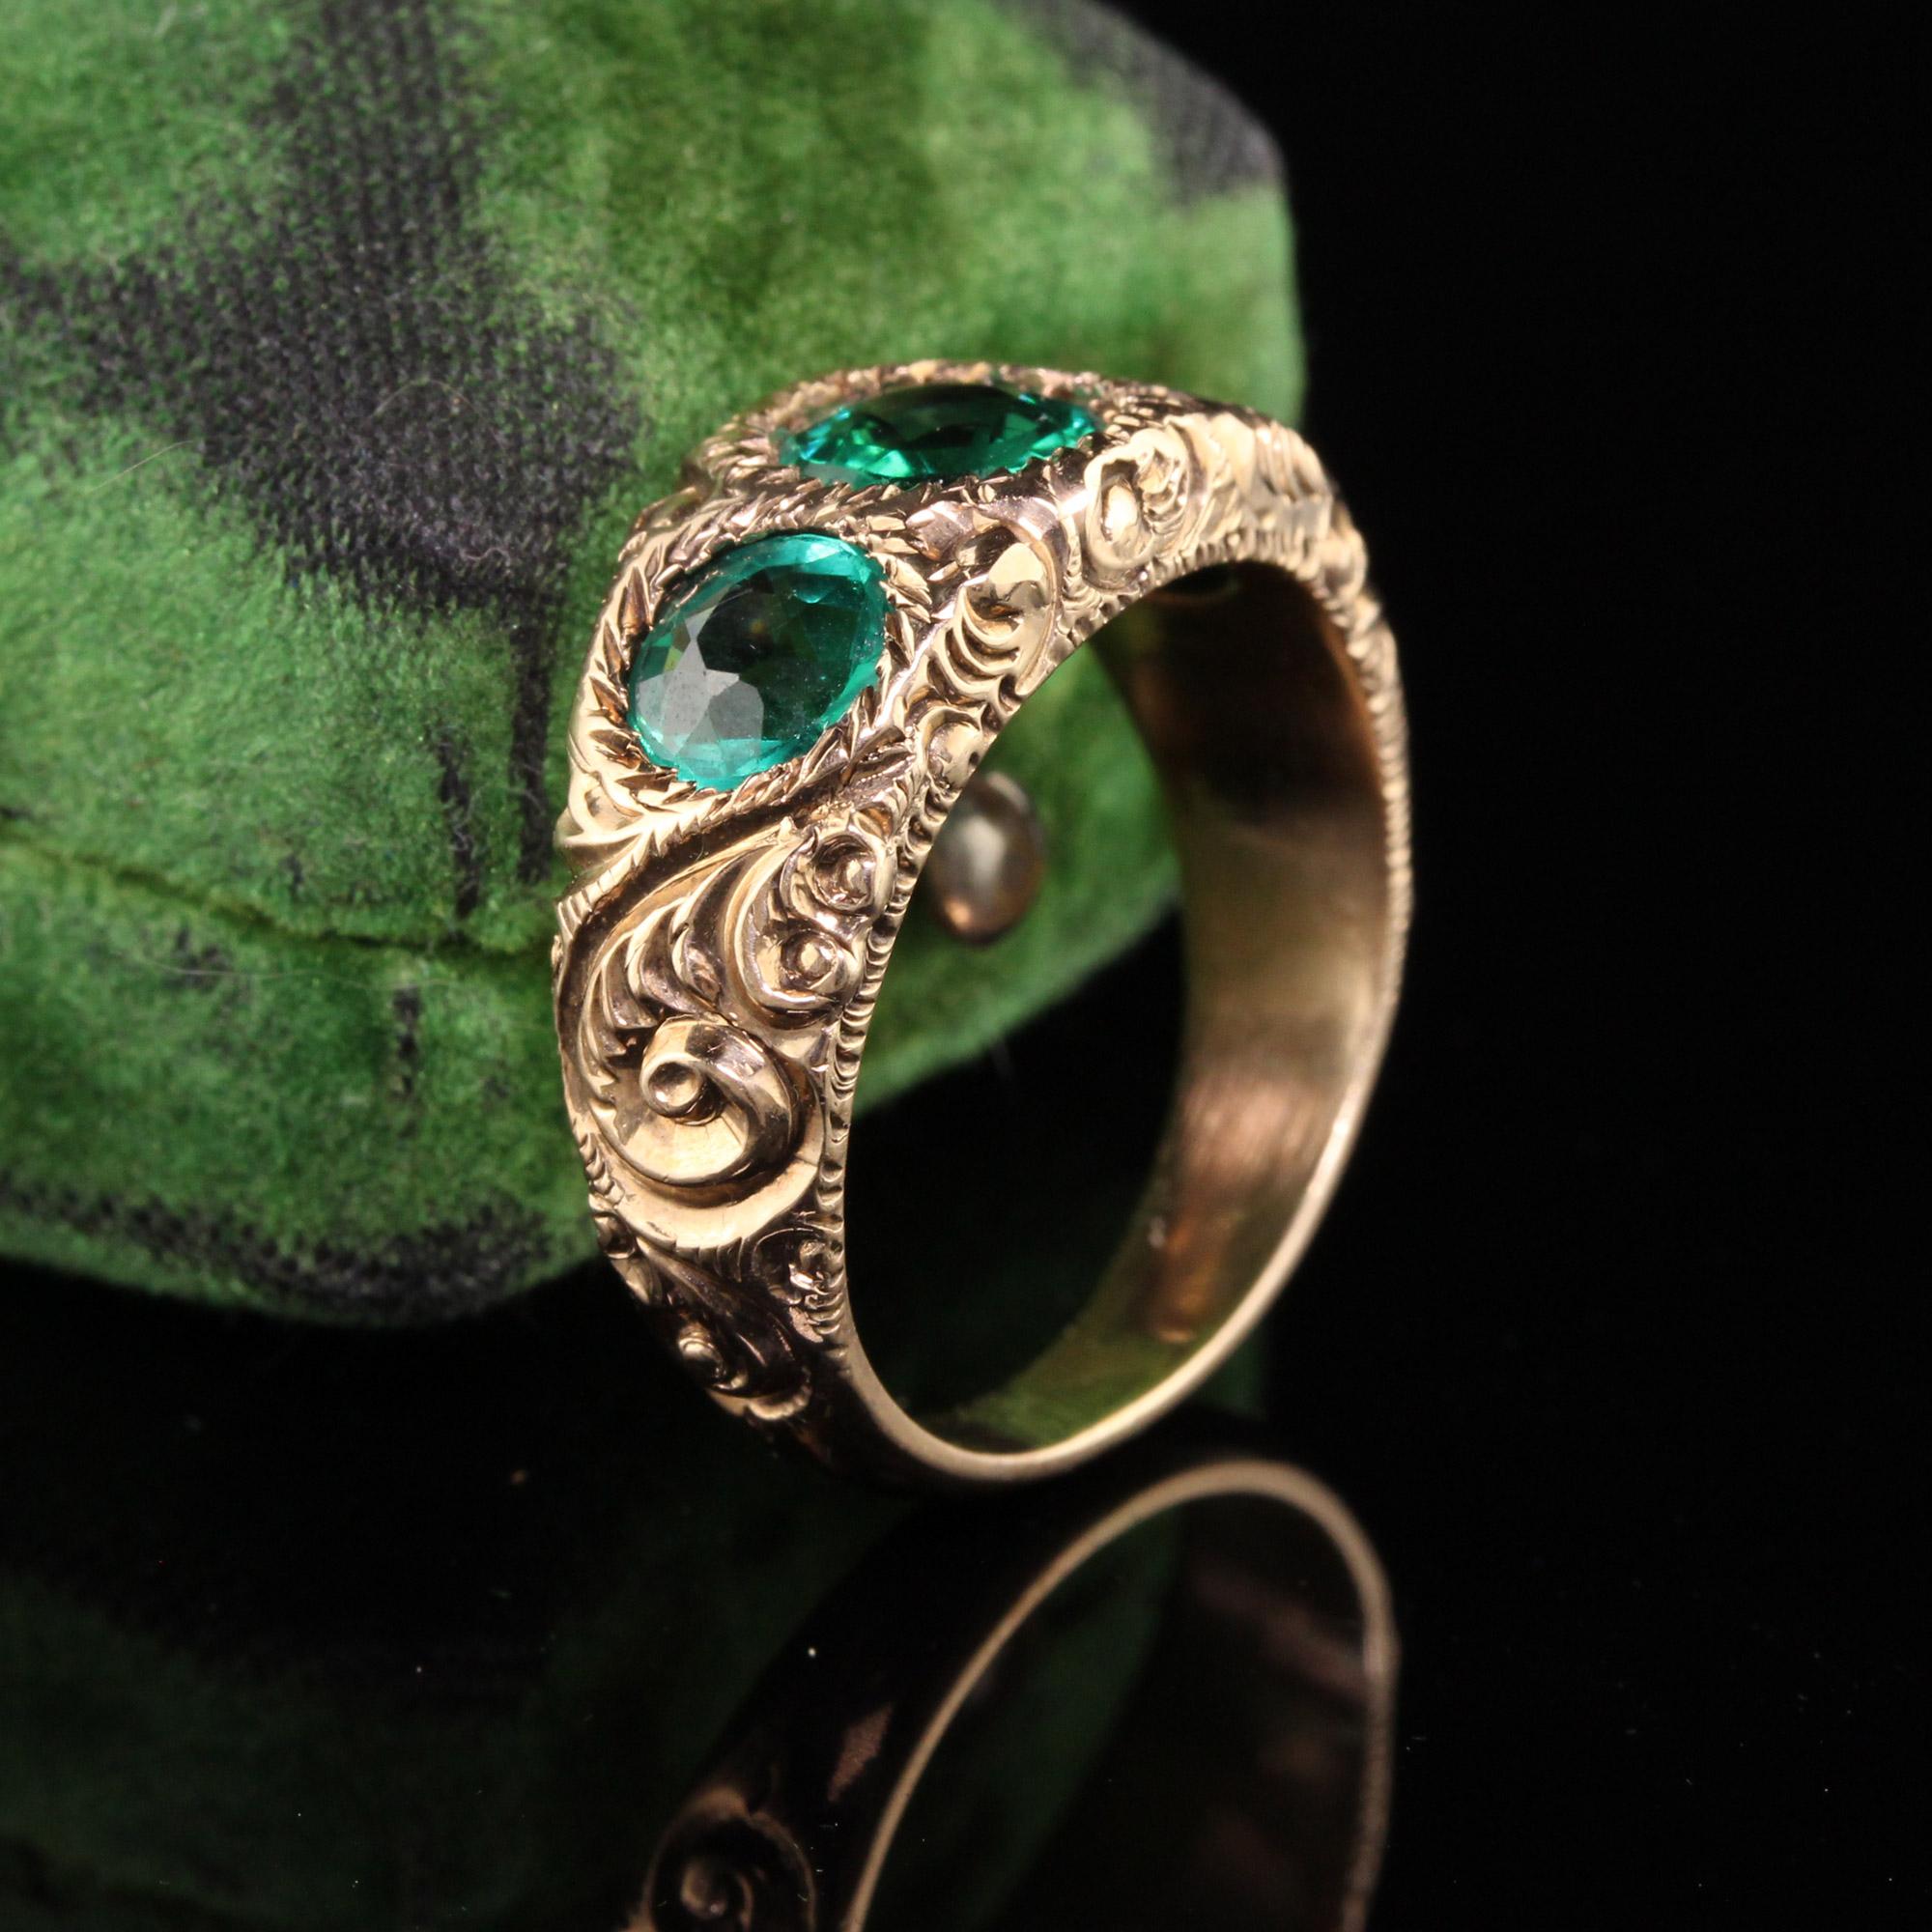 Beautiful Antique Victorian 14K Yellow Gold Three Stone Engraved Ring. This gorgeous ring has 3 green flame fusionstones in the center. The entire ring is deeply engraved and is solid all the way through.

Item #R0815

Metal: 14K Yellow